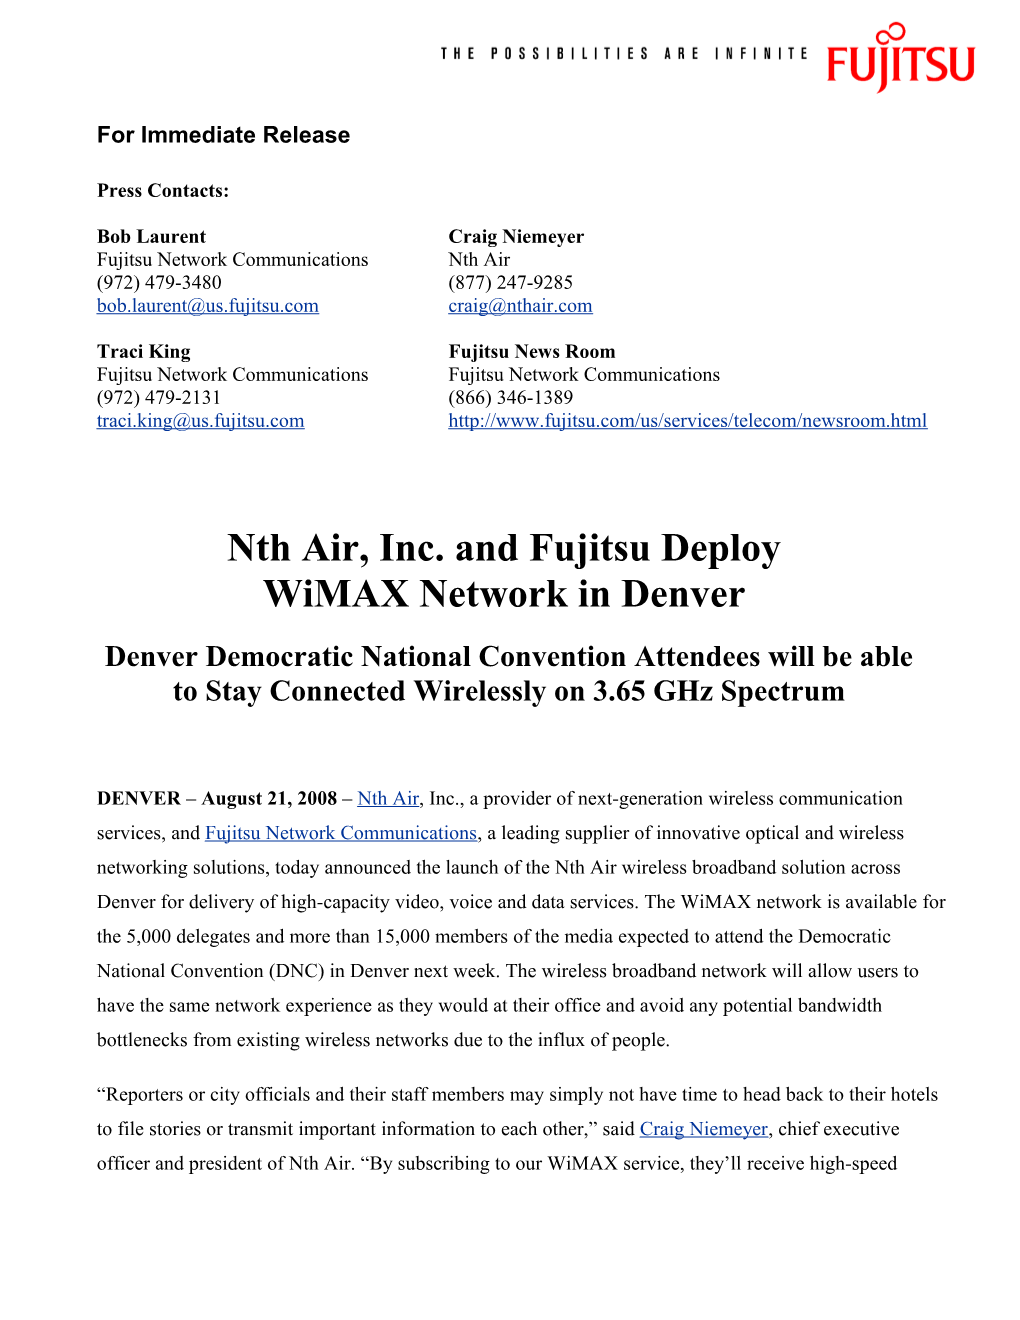 Nth Air, Inc. and Fujitsu Deploy Wimax Network in Denverpage 1 of 3